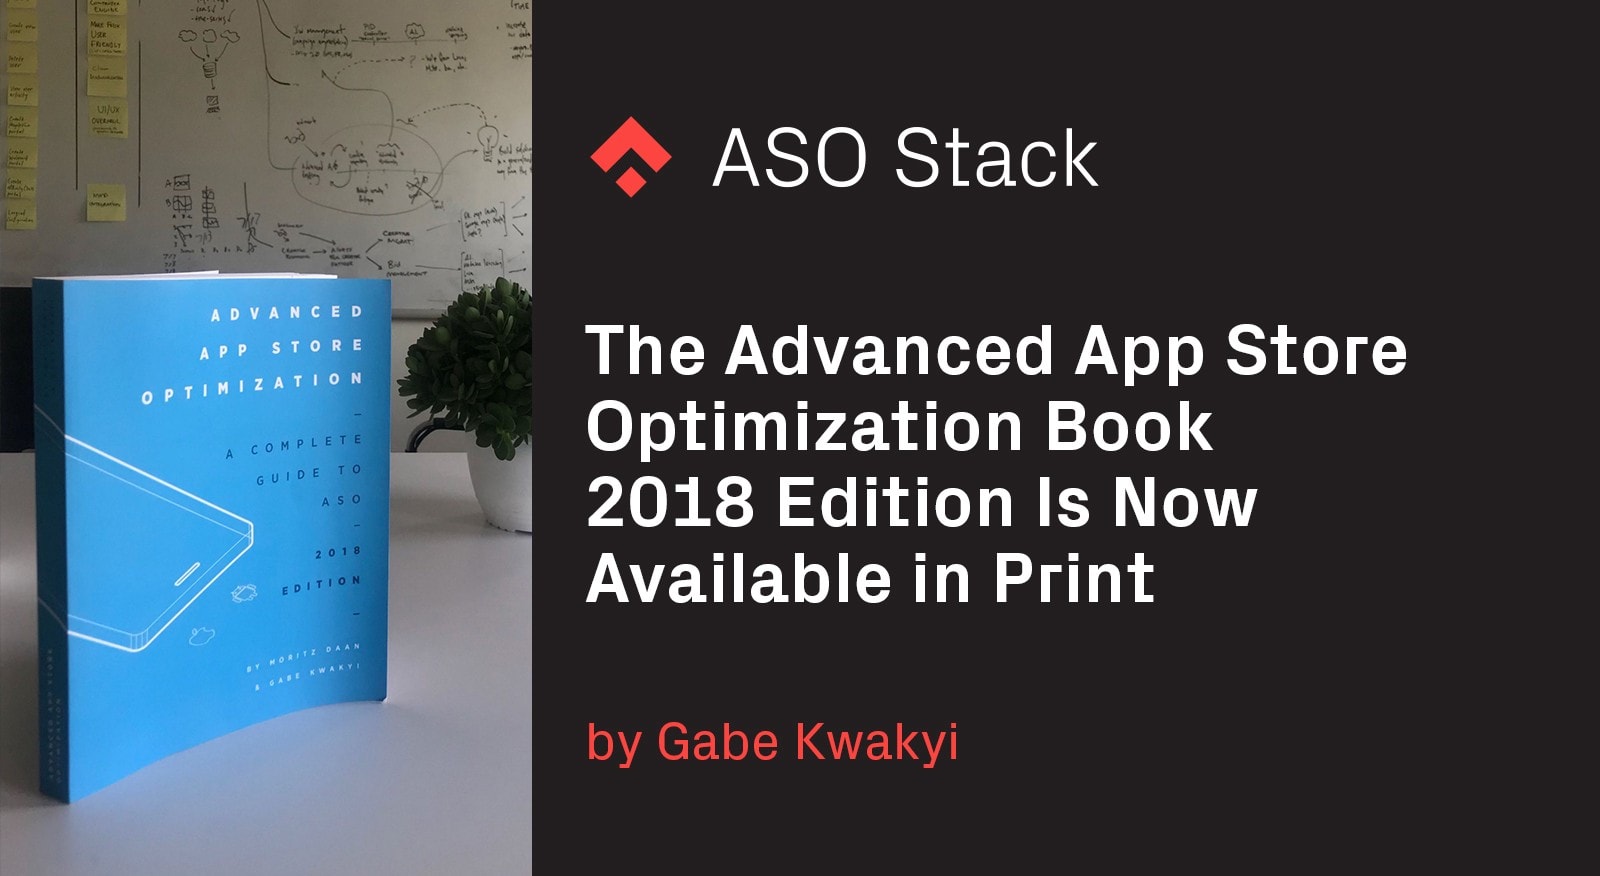 The Advanced App Store Optimization Book 2018 Edition is Now Available in Print